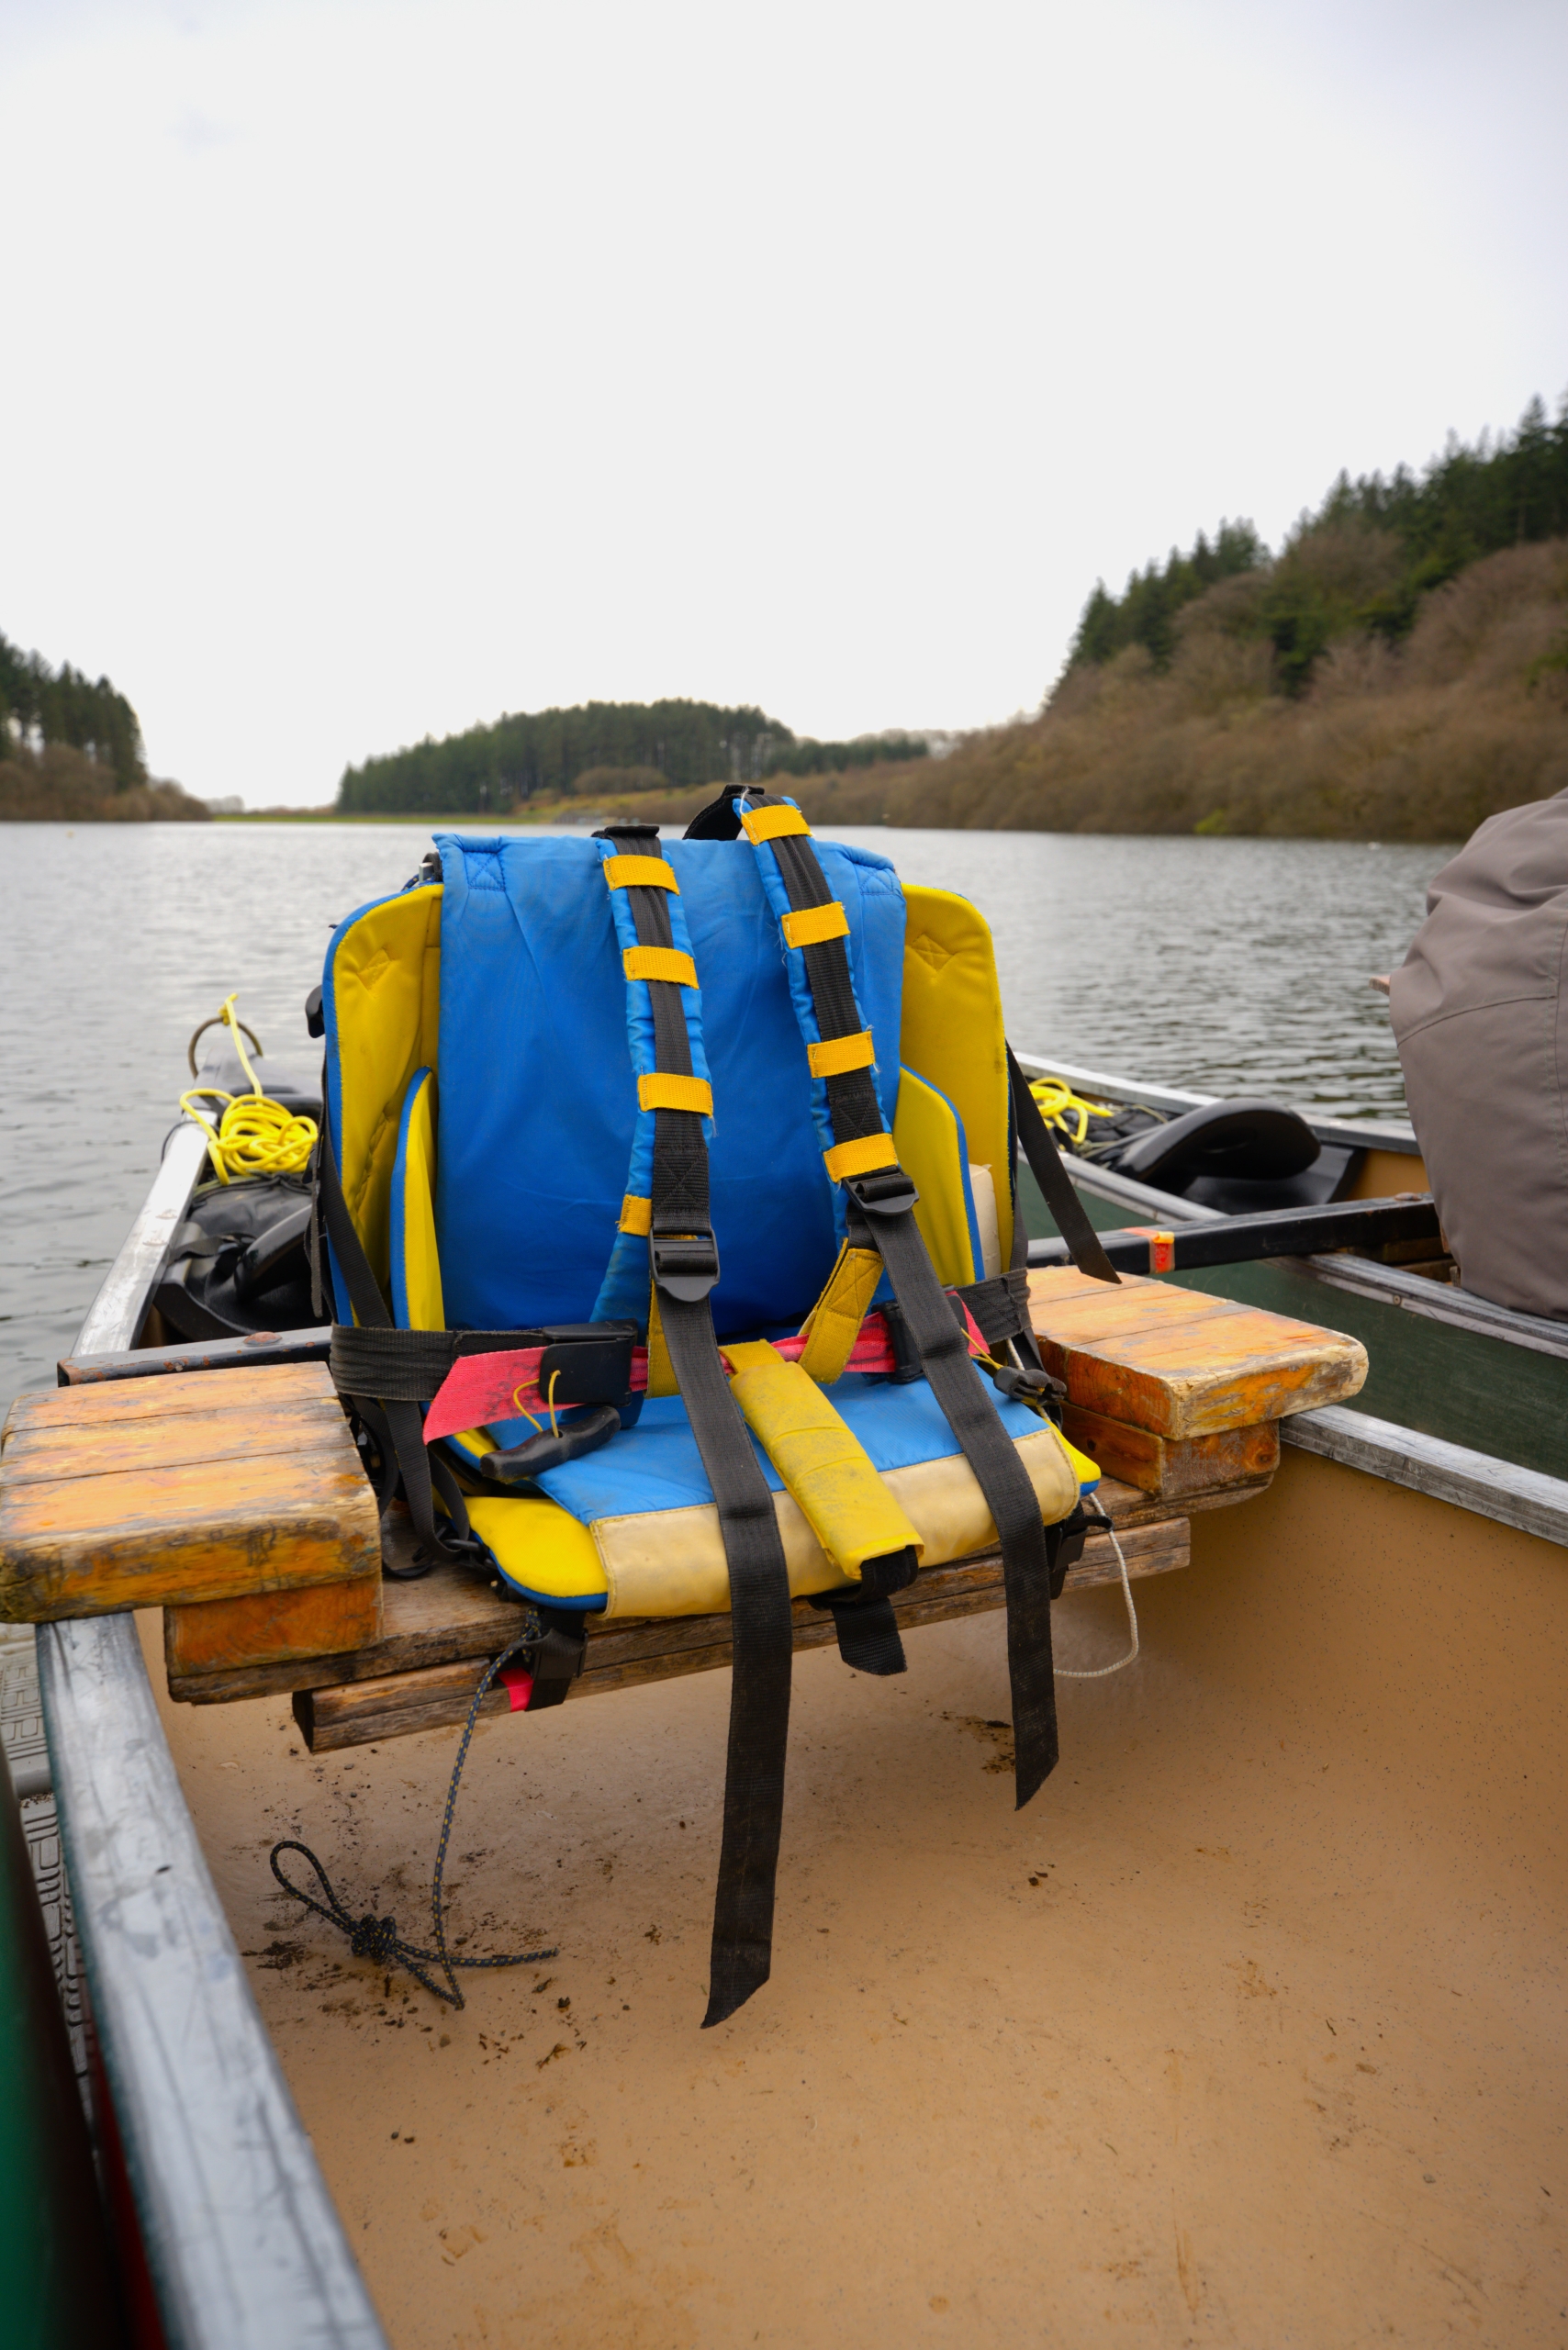 A blue and yellow padded seat with back support and shoulder straps on a wooden seat in a canoe with the reservoir in the background.